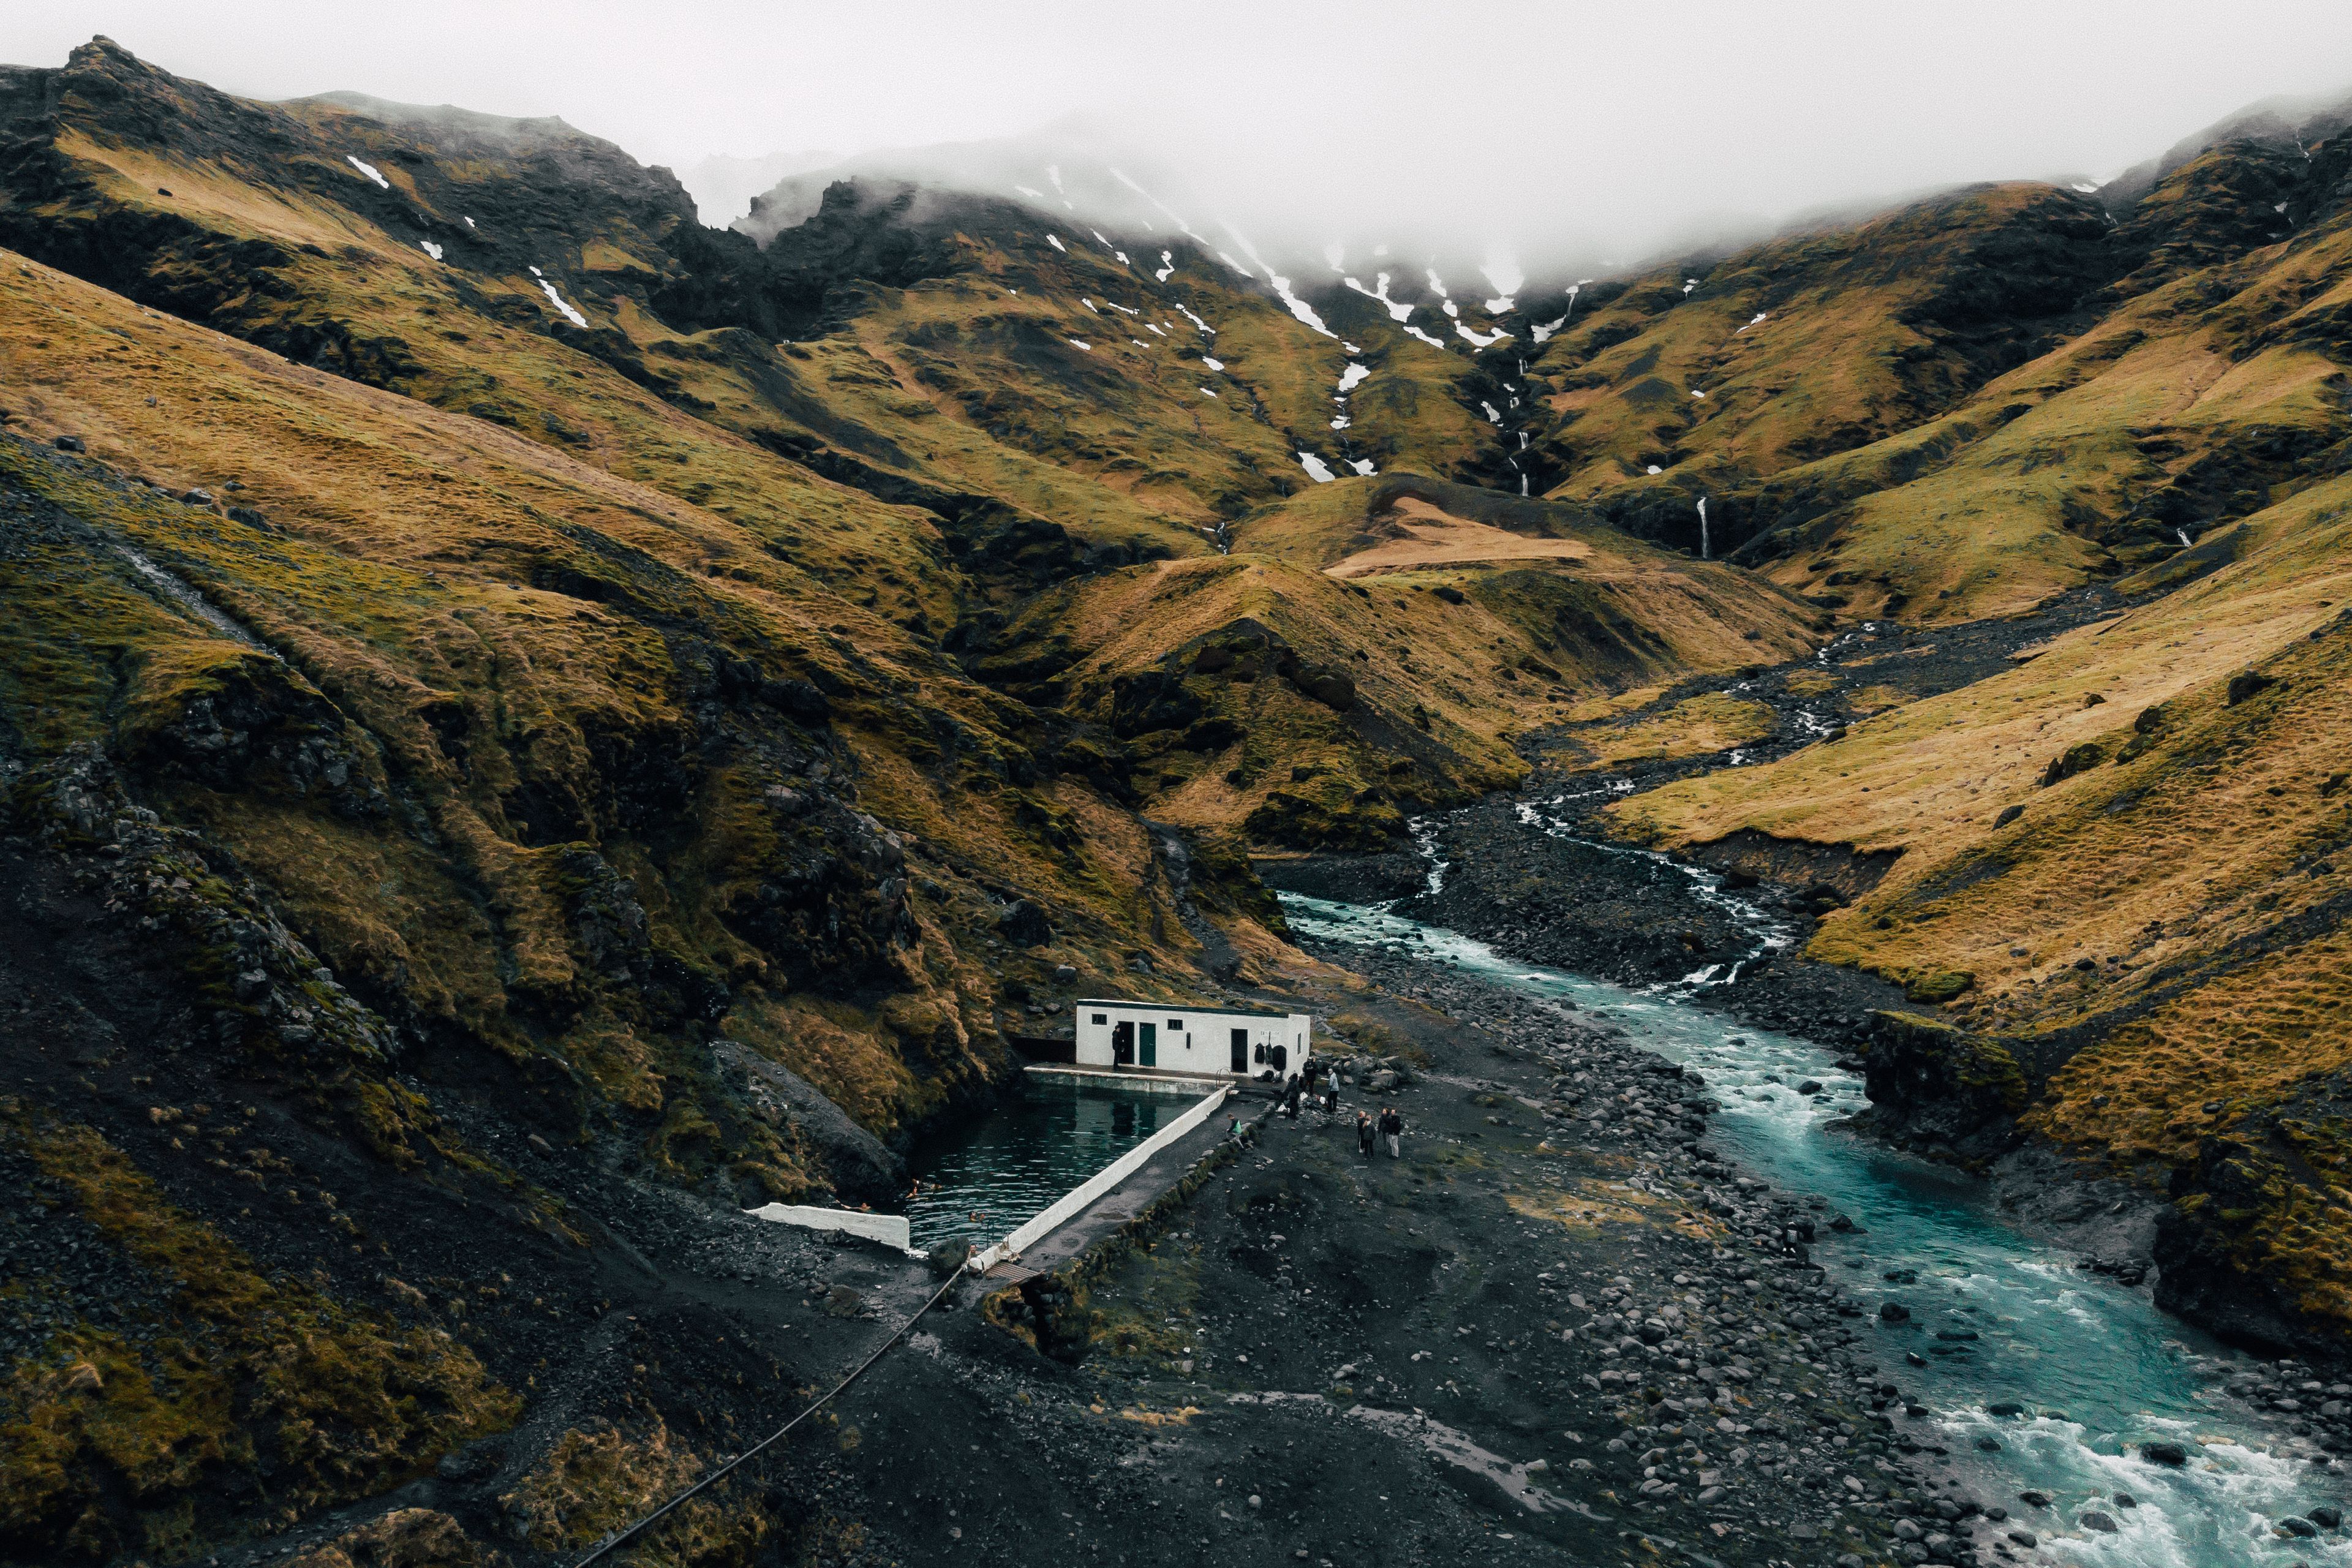 Fall in Iceland's mountains, natural hot spring pool